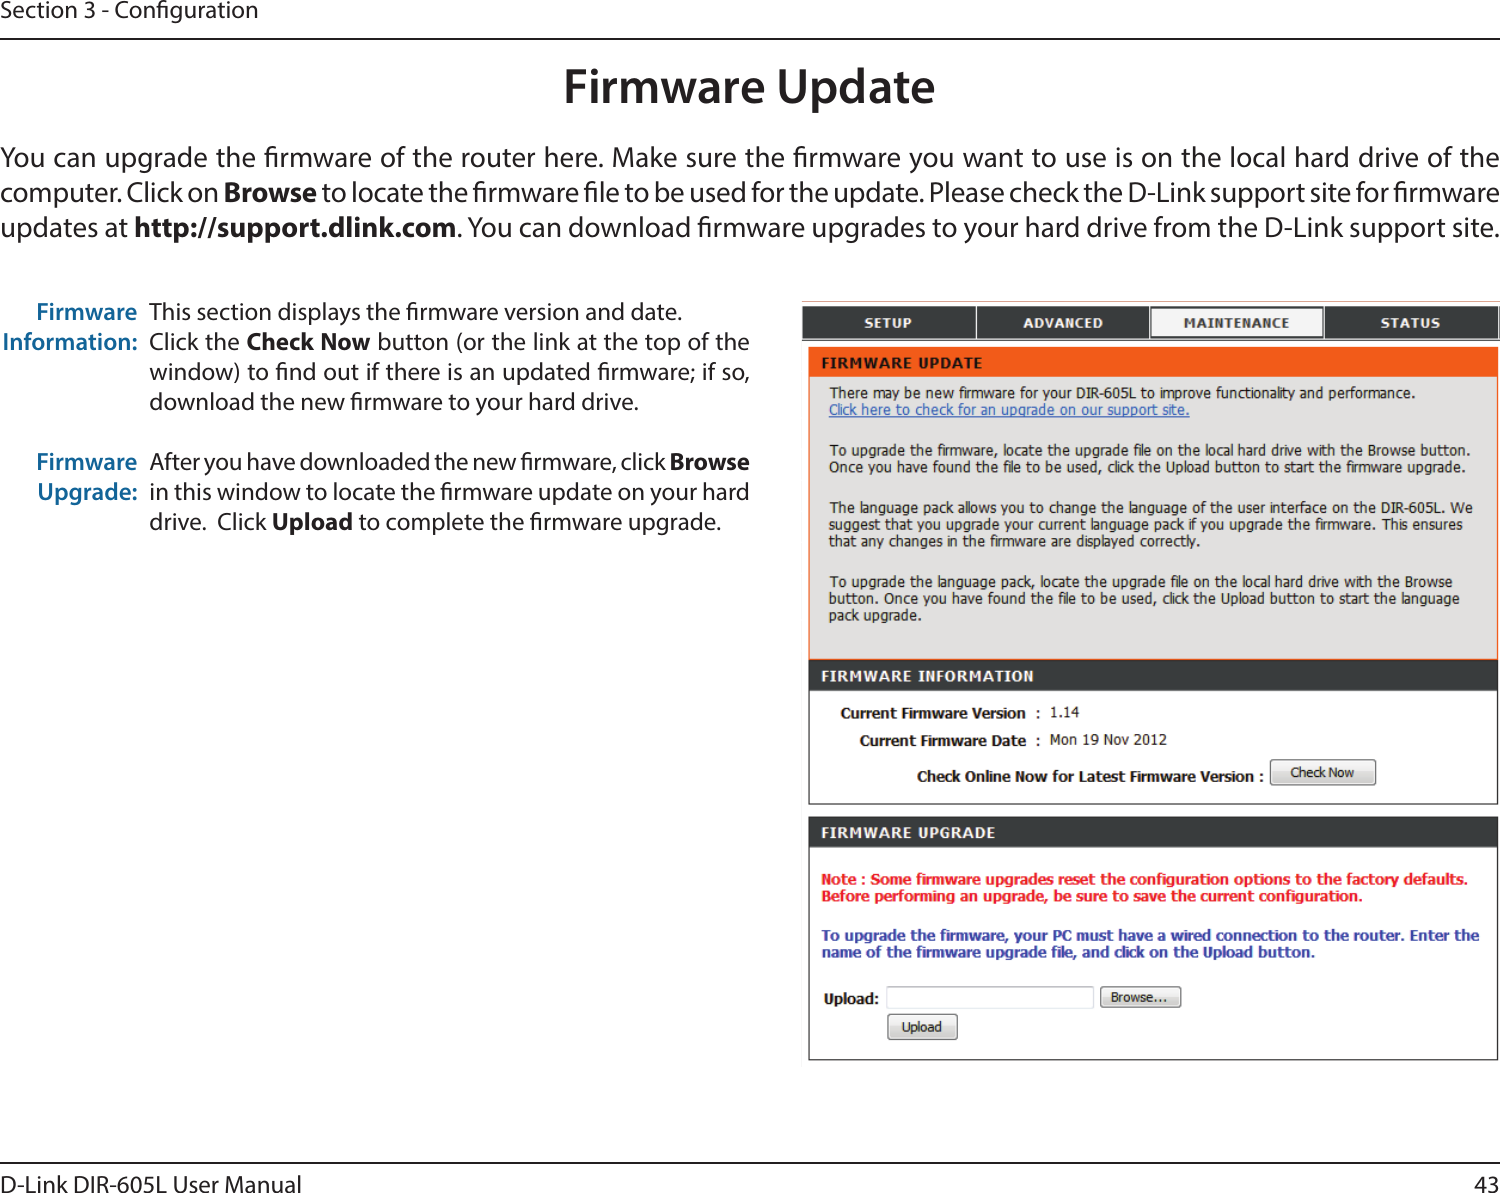 43D-Link DIR-605L User ManualSection 3 - CongurationFirmware UpdateThis section displays the rmware version and date.Click the Check Now button (or the link at the top of the window) to nd out if there is an updated rmware; if so, download the new rmware to your hard drive.After you have downloaded the new rmware, click Browse in this window to locate the rmware update on your hard drive.  Click Upload to complete the rmware upgrade.Firmware Information:Firmware Upgrade:You can upgrade the rmware of the router here. Make sure the rmware you want to use is on the local hard drive of the computer. Click on Browse to locate the rmware le to be used for the update. Please check the D-Link support site for rmware updates at http://support.dlink.com. You can download rmware upgrades to your hard drive from the D-Link support site.